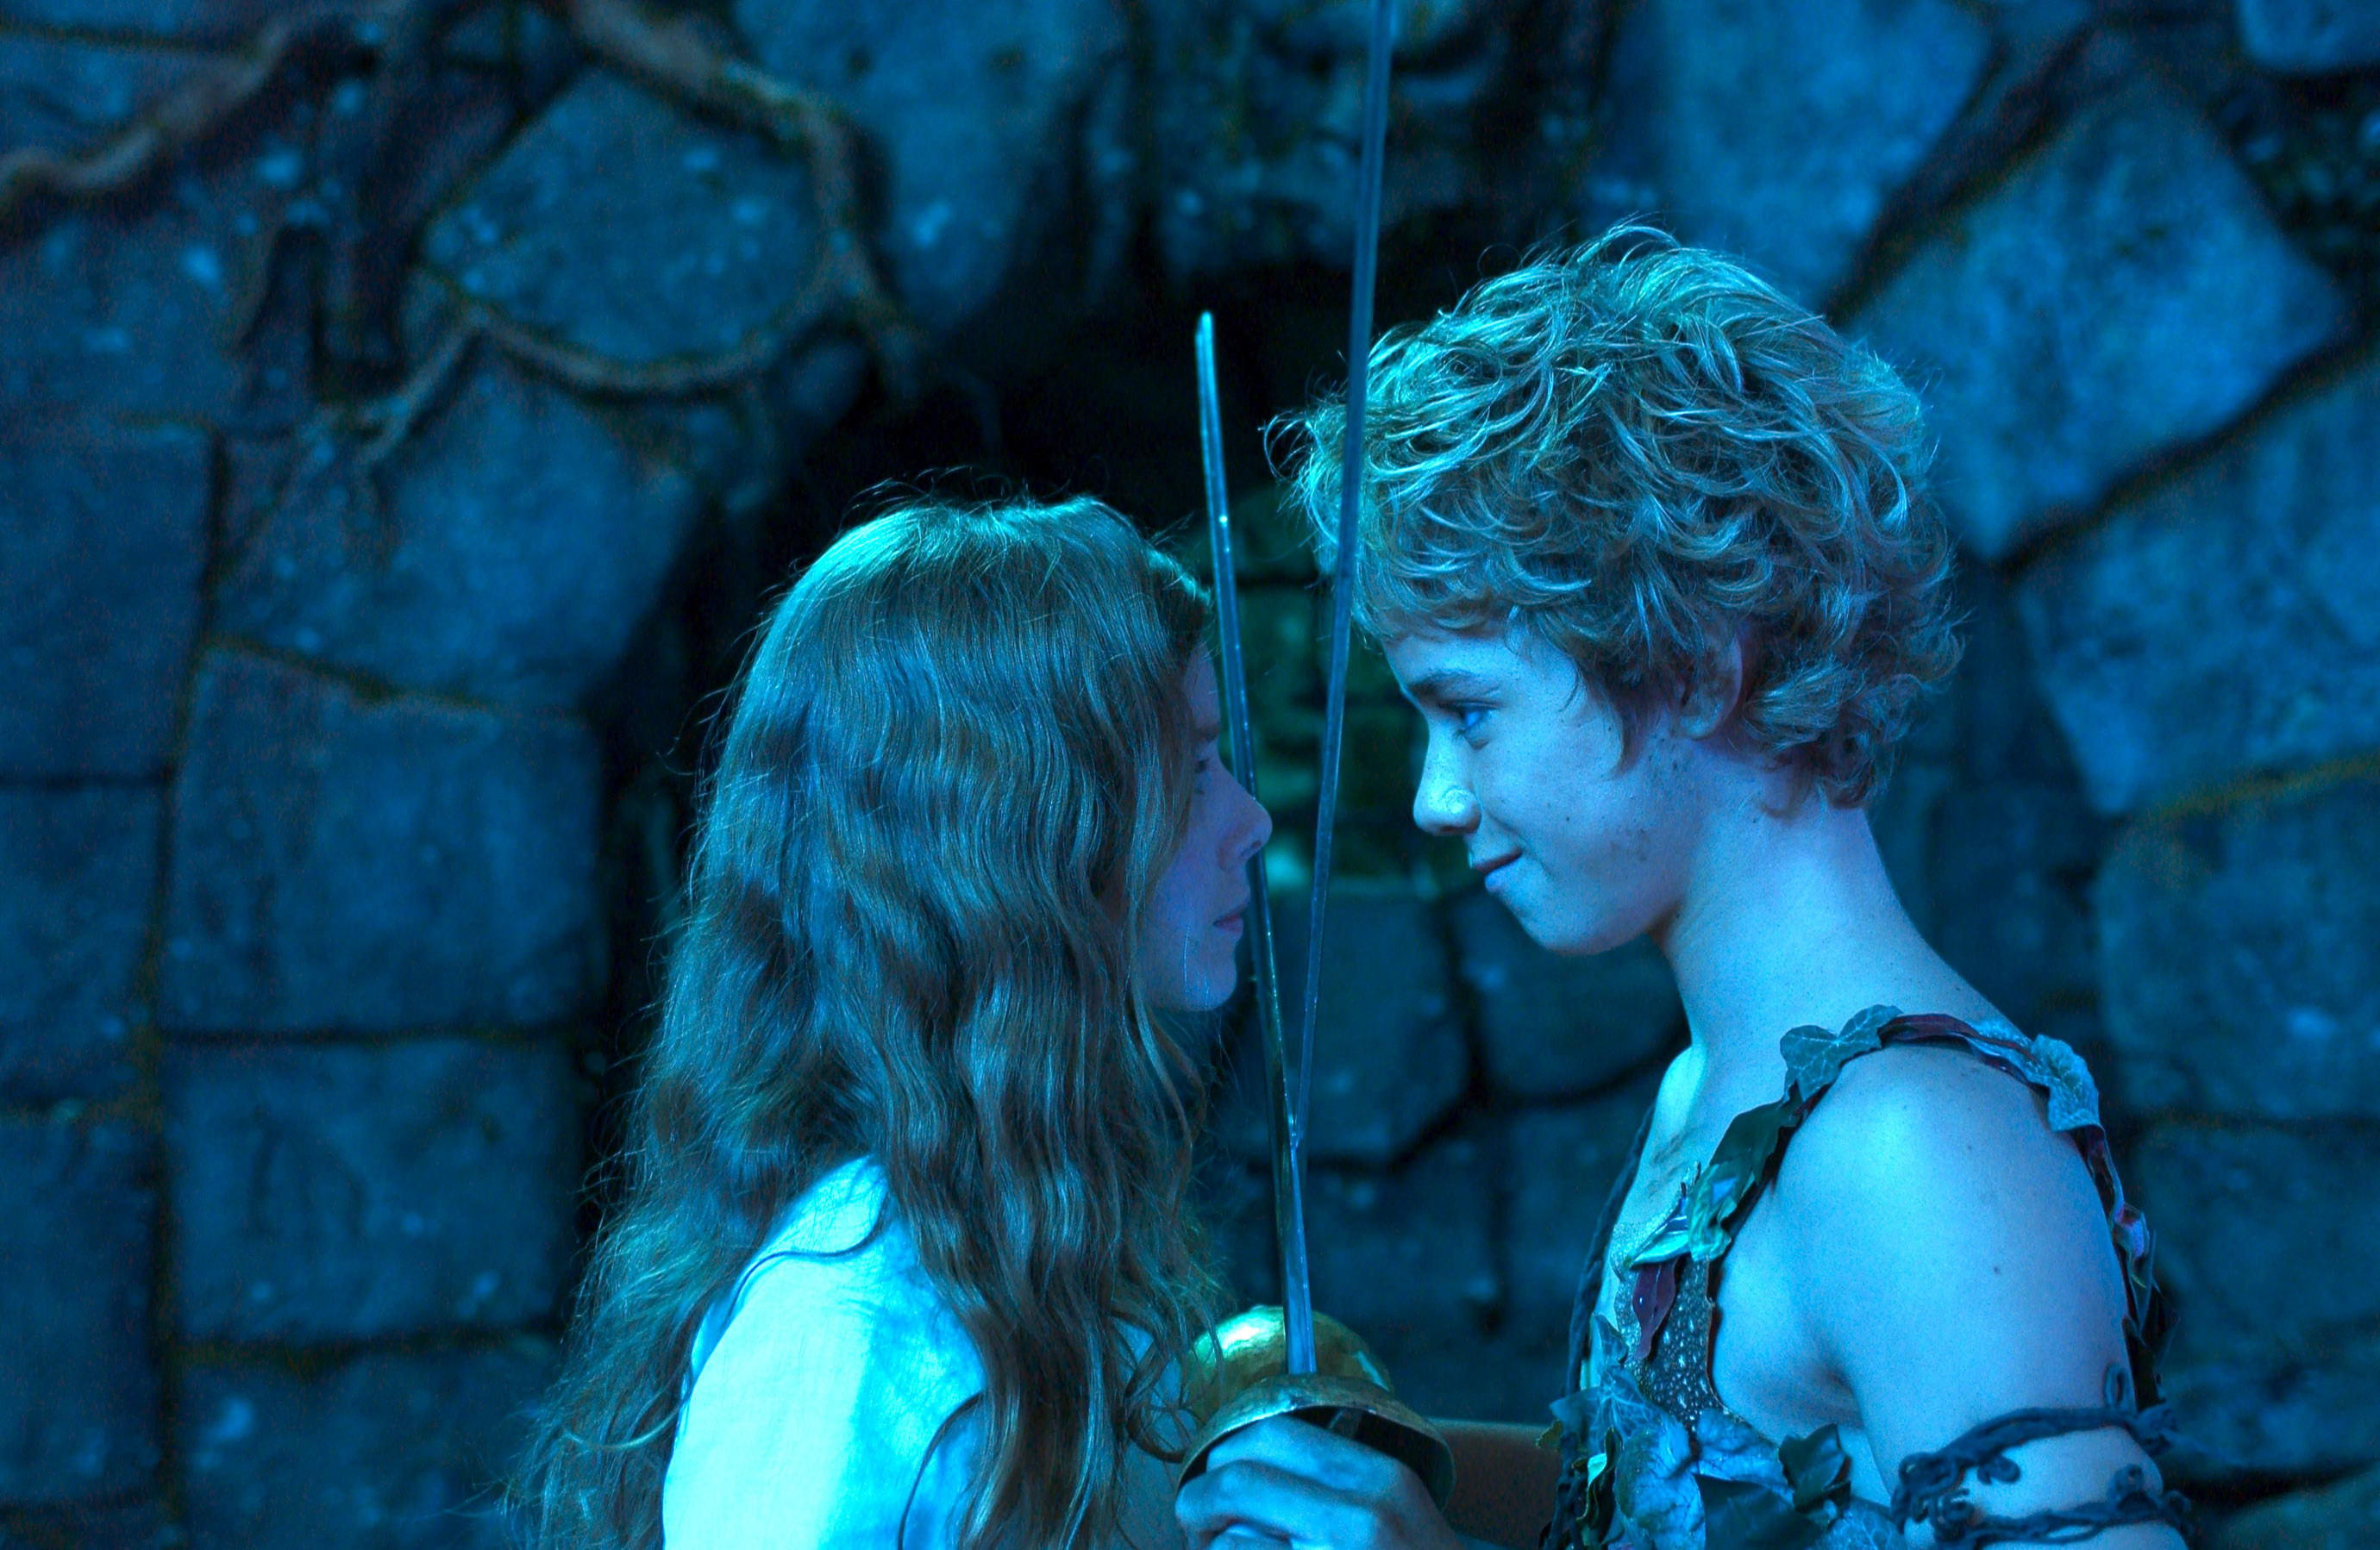 Rachel Hurd-Wood and Jeremy Sumpter looking into each others eyes